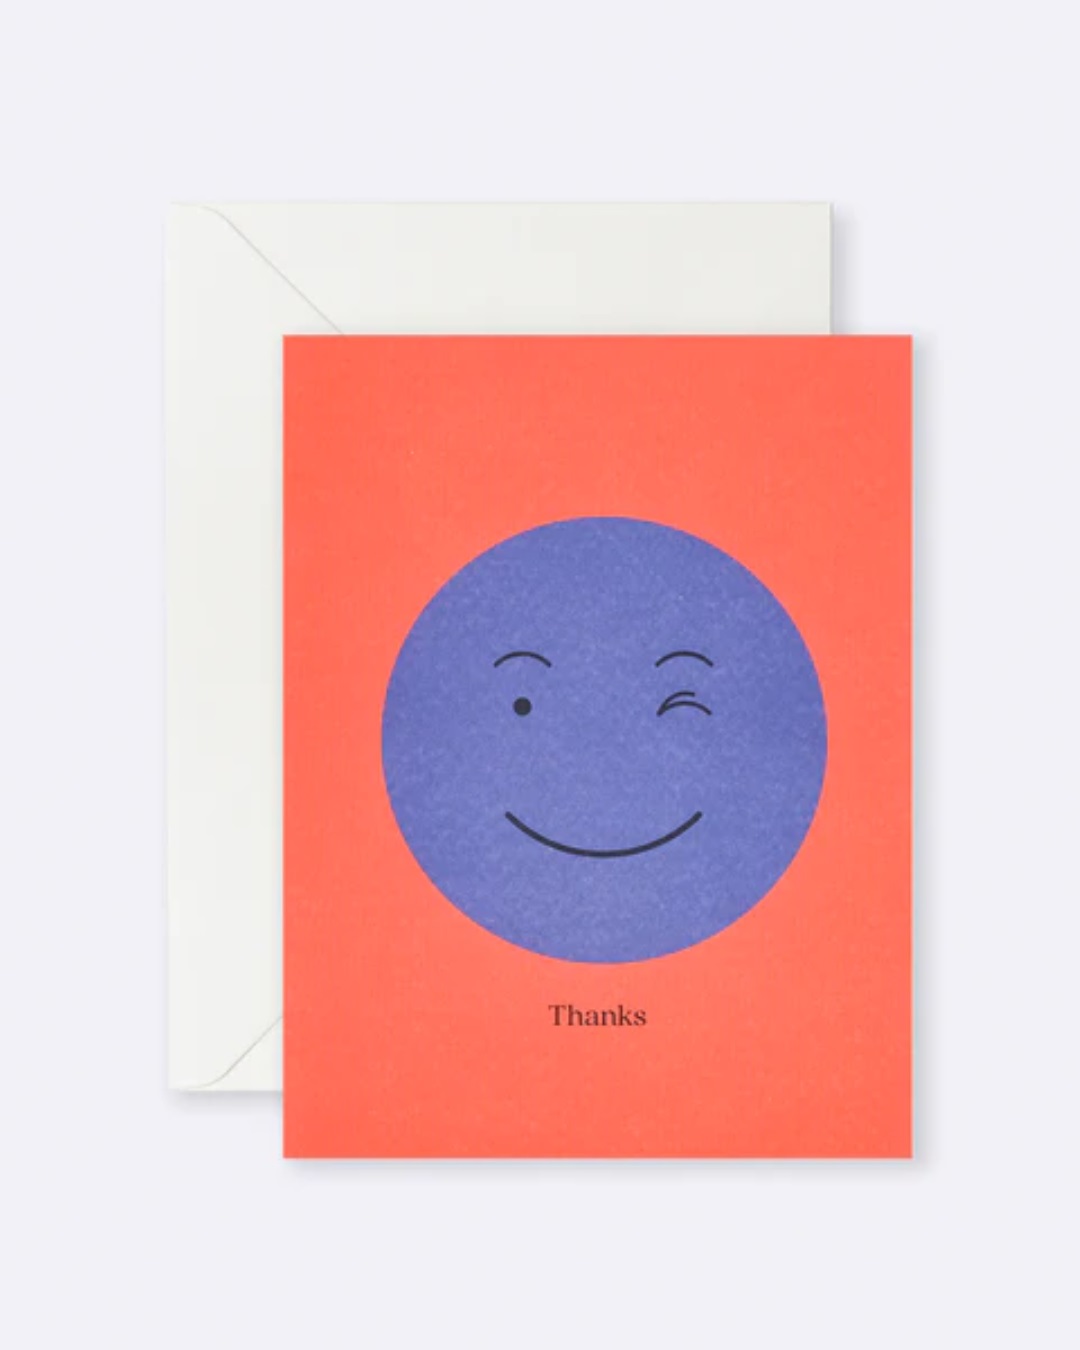 Orange card with blue wink face and thanks on it